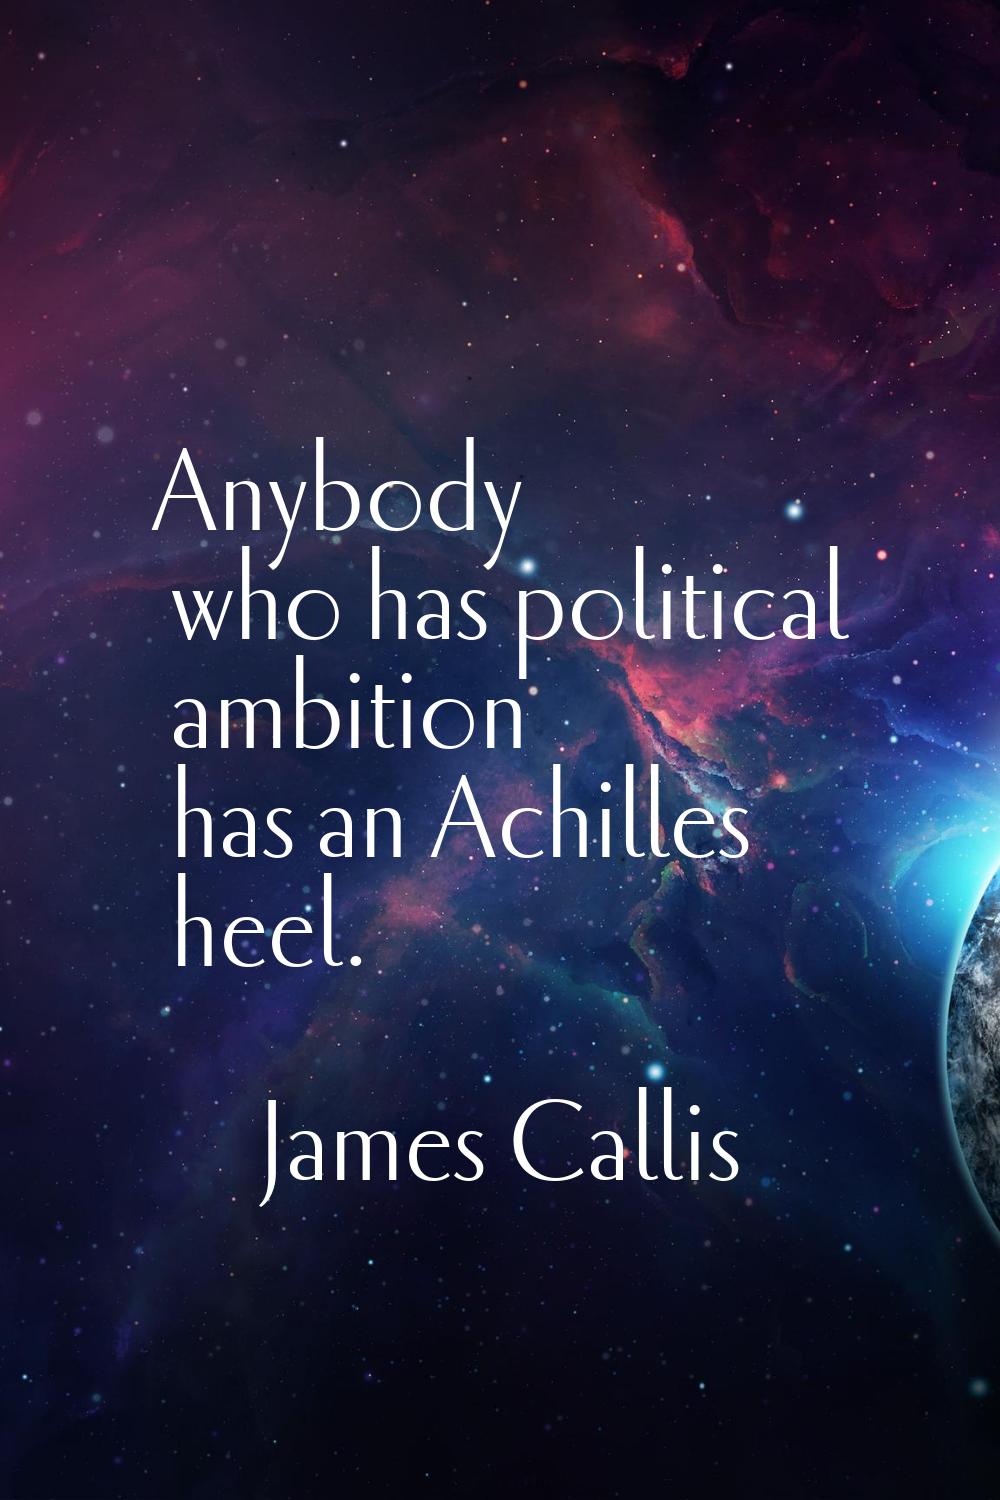 Anybody who has political ambition has an Achilles heel.